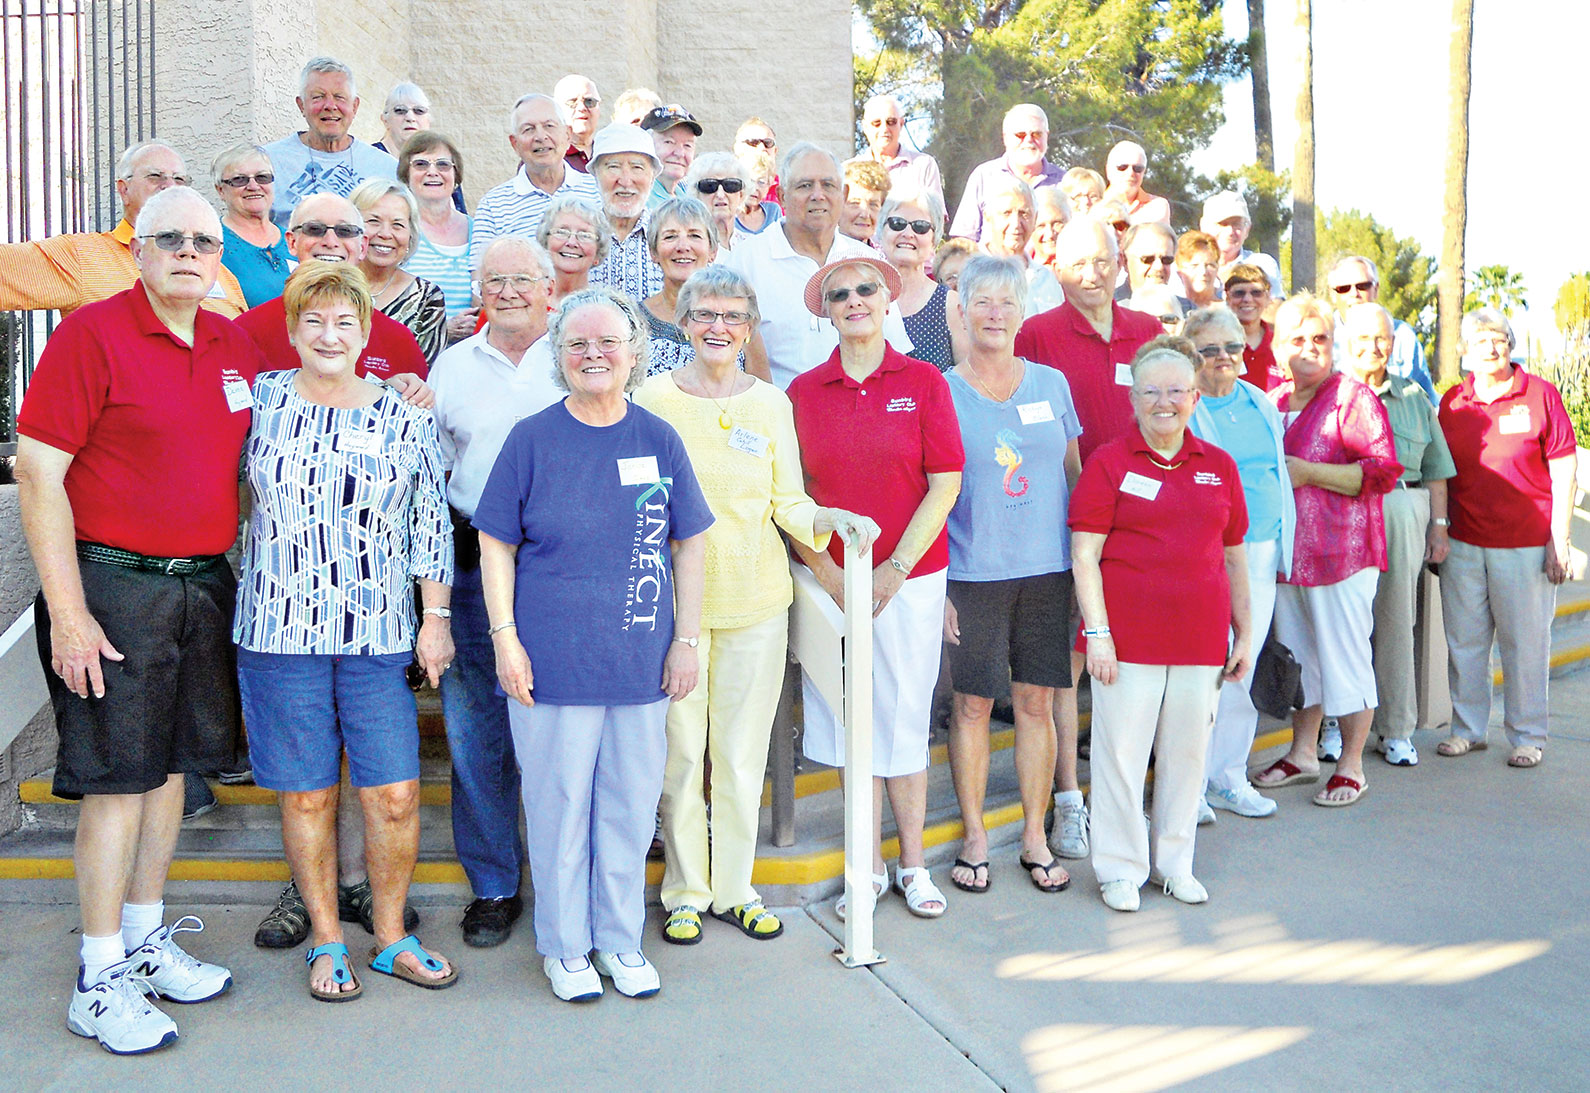 Members of the SunBird Lapidary Club celebrated at the End of the Season Party.